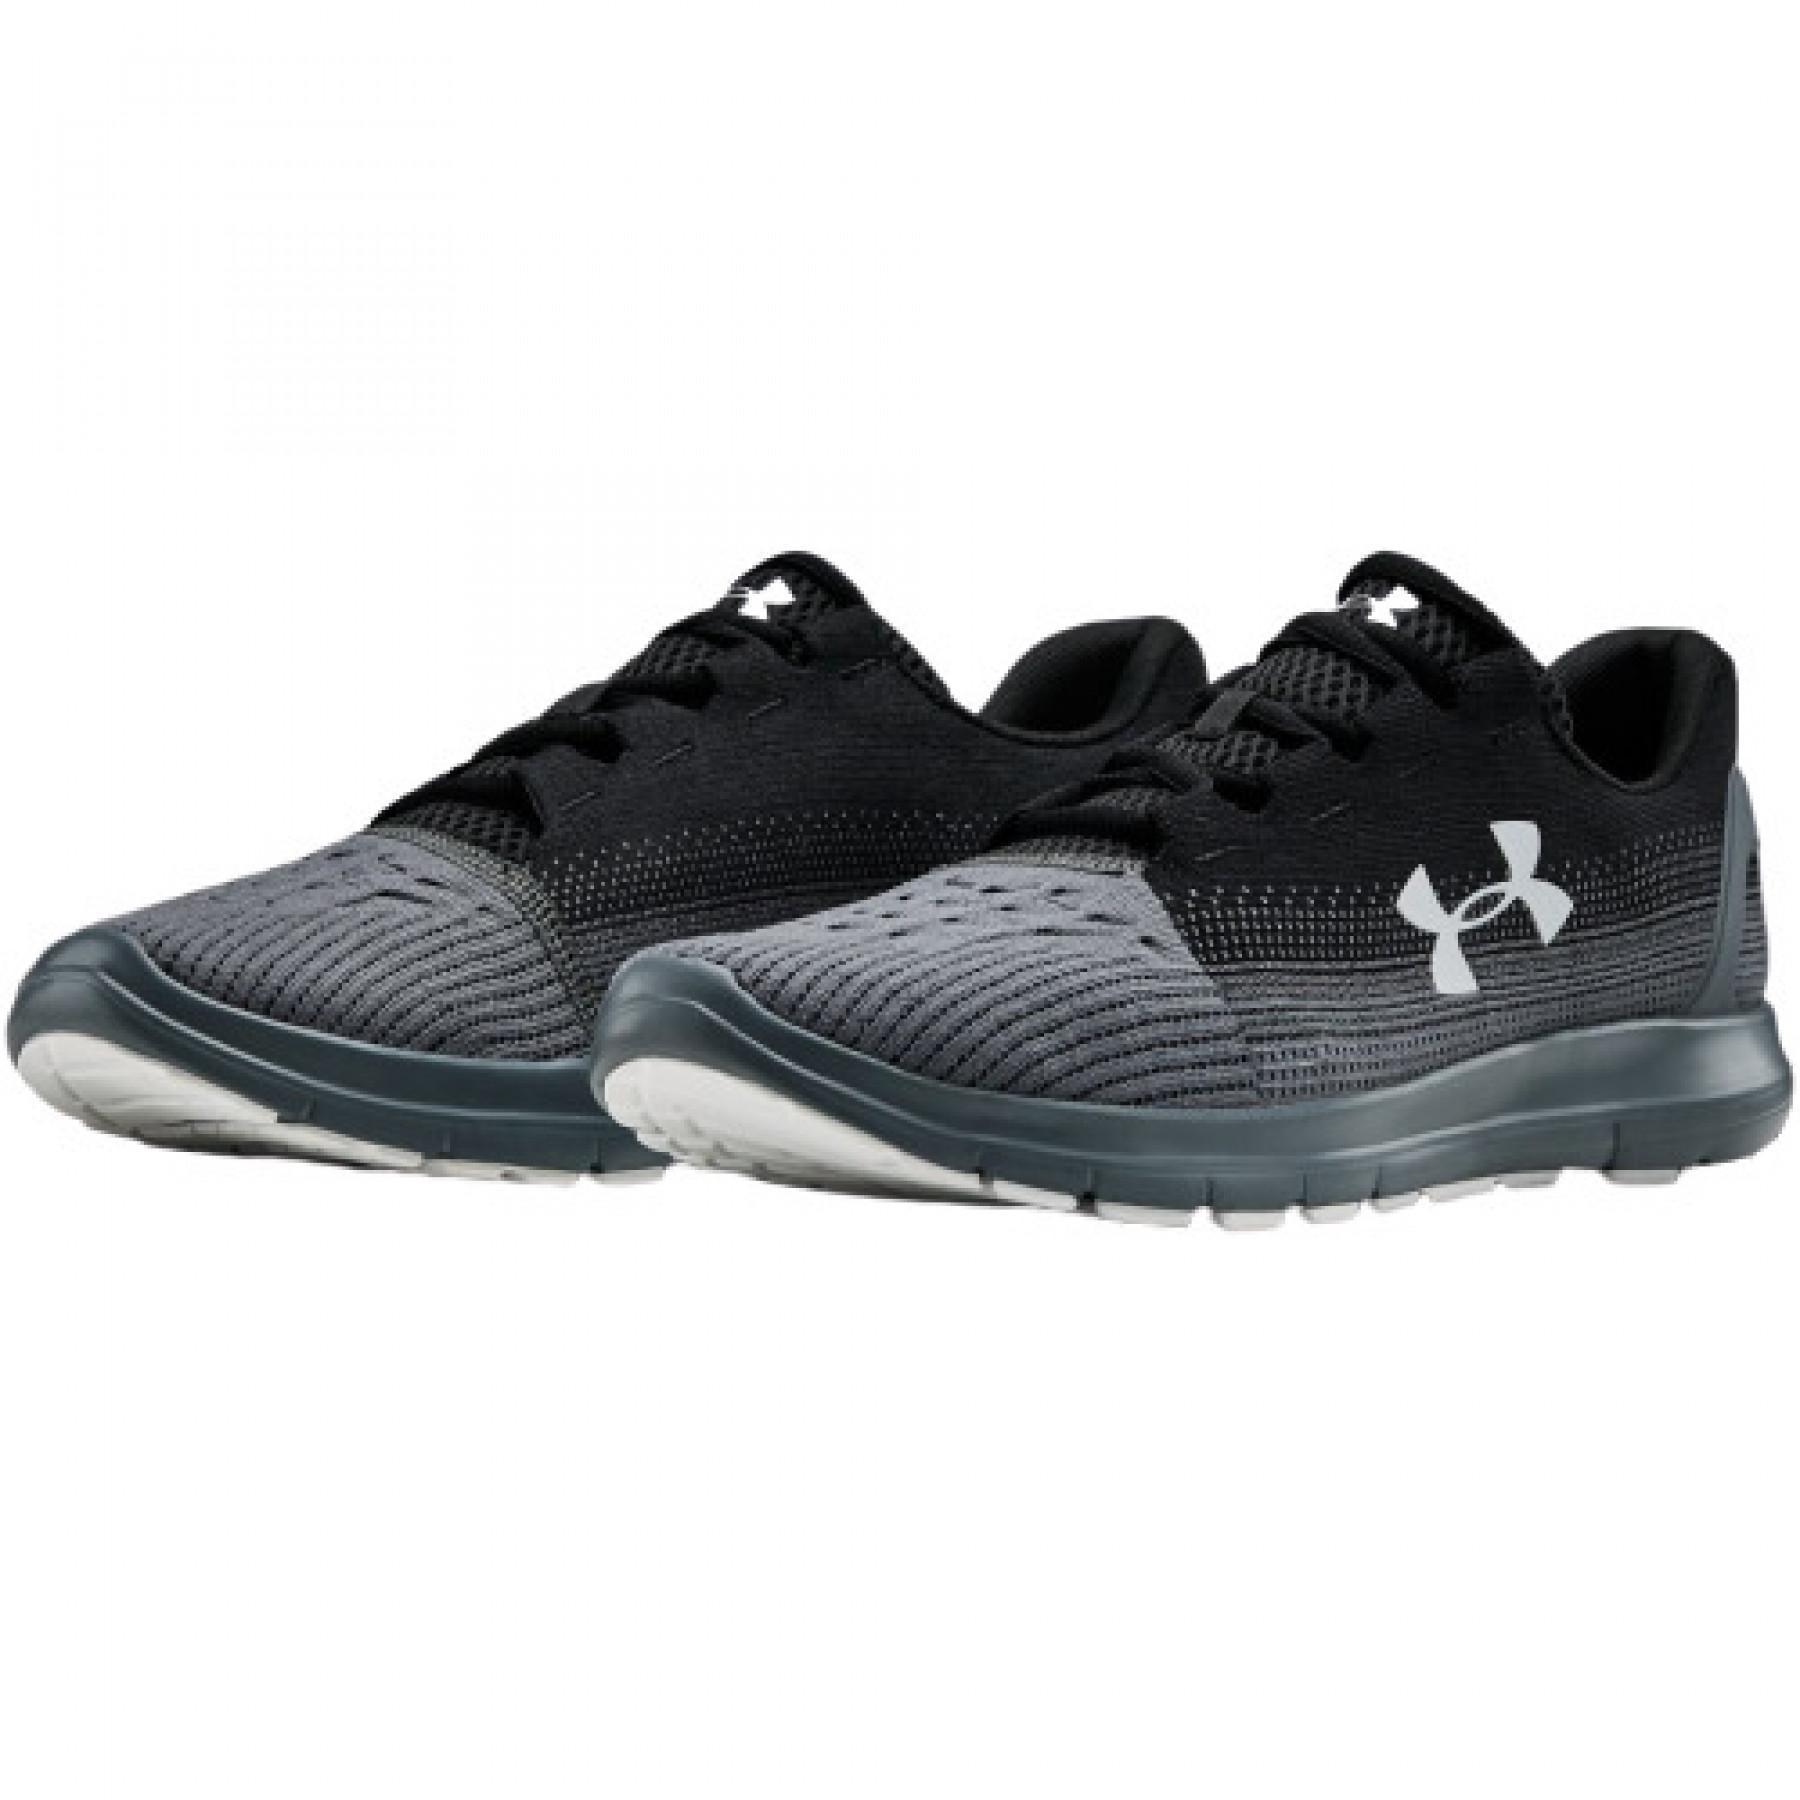 Sneakers Under Armour Remix 2.0